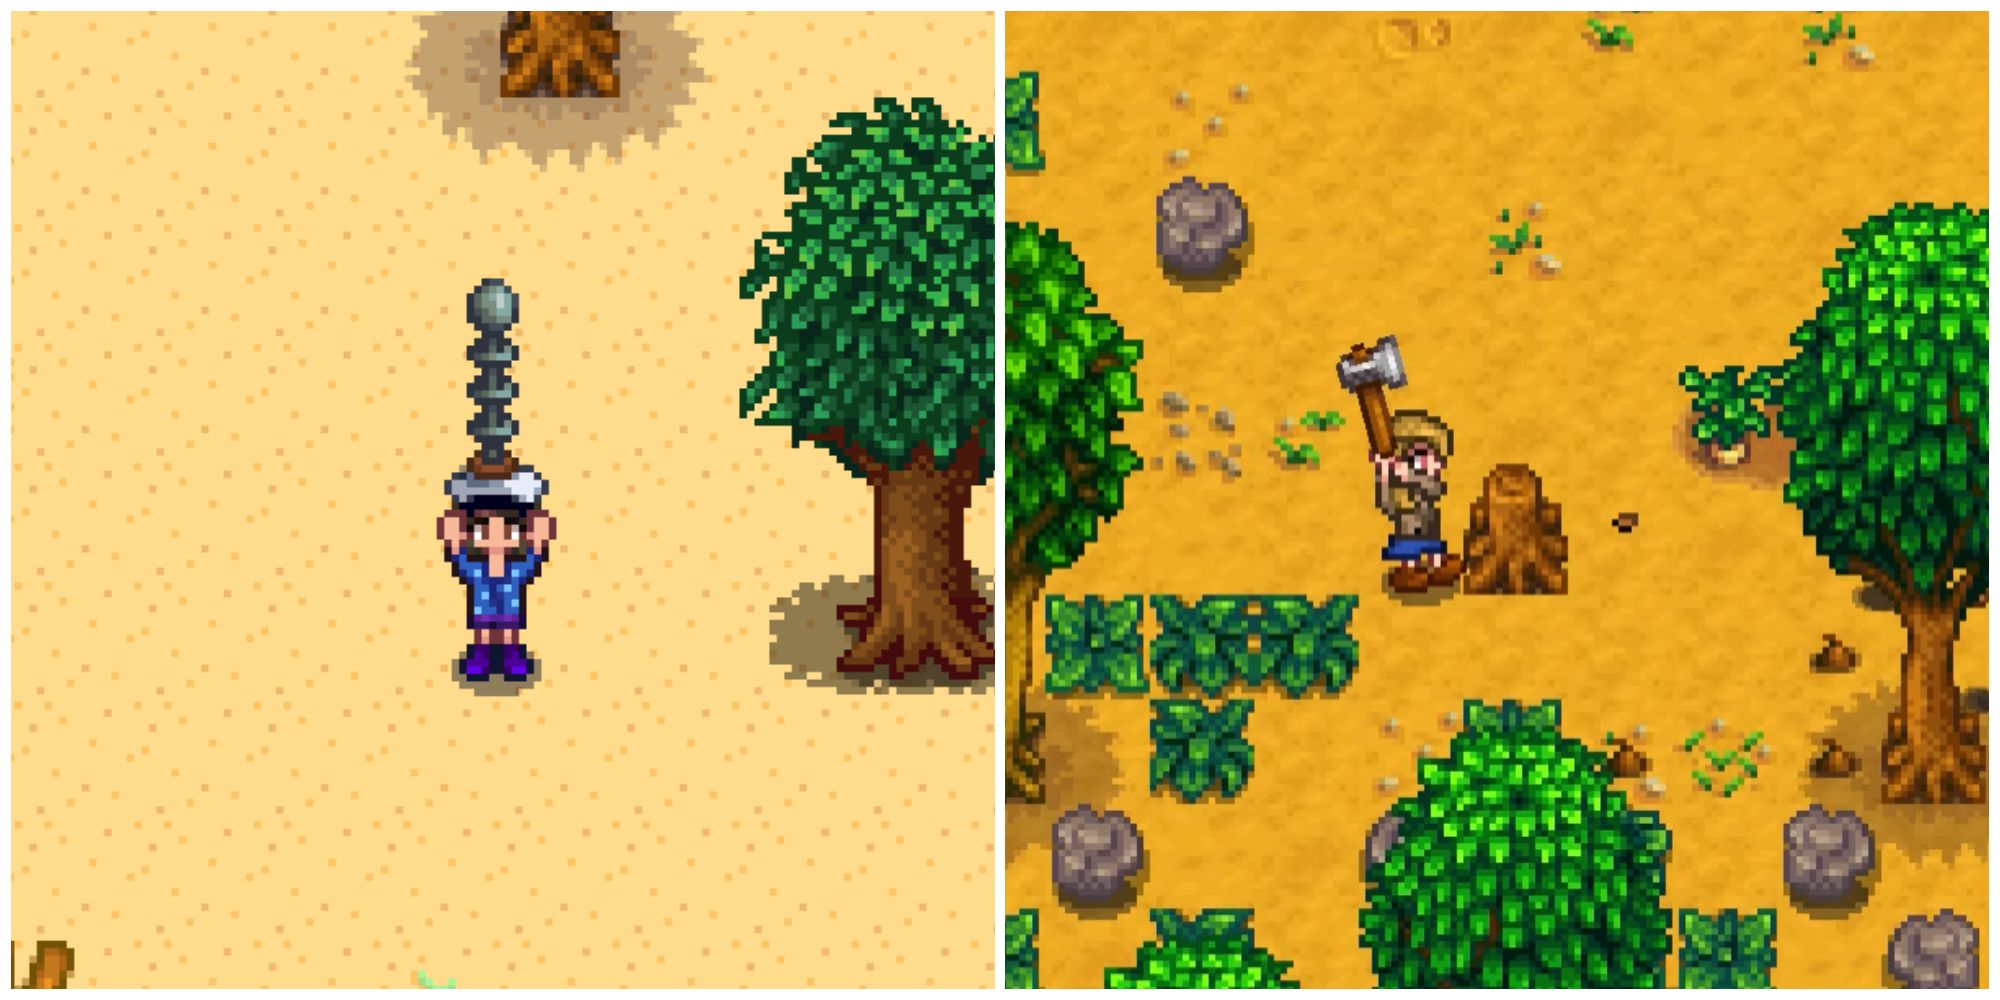 Split image of a character holding a lightning rod and a character chopping down a tree and a stump in Stardew Valley